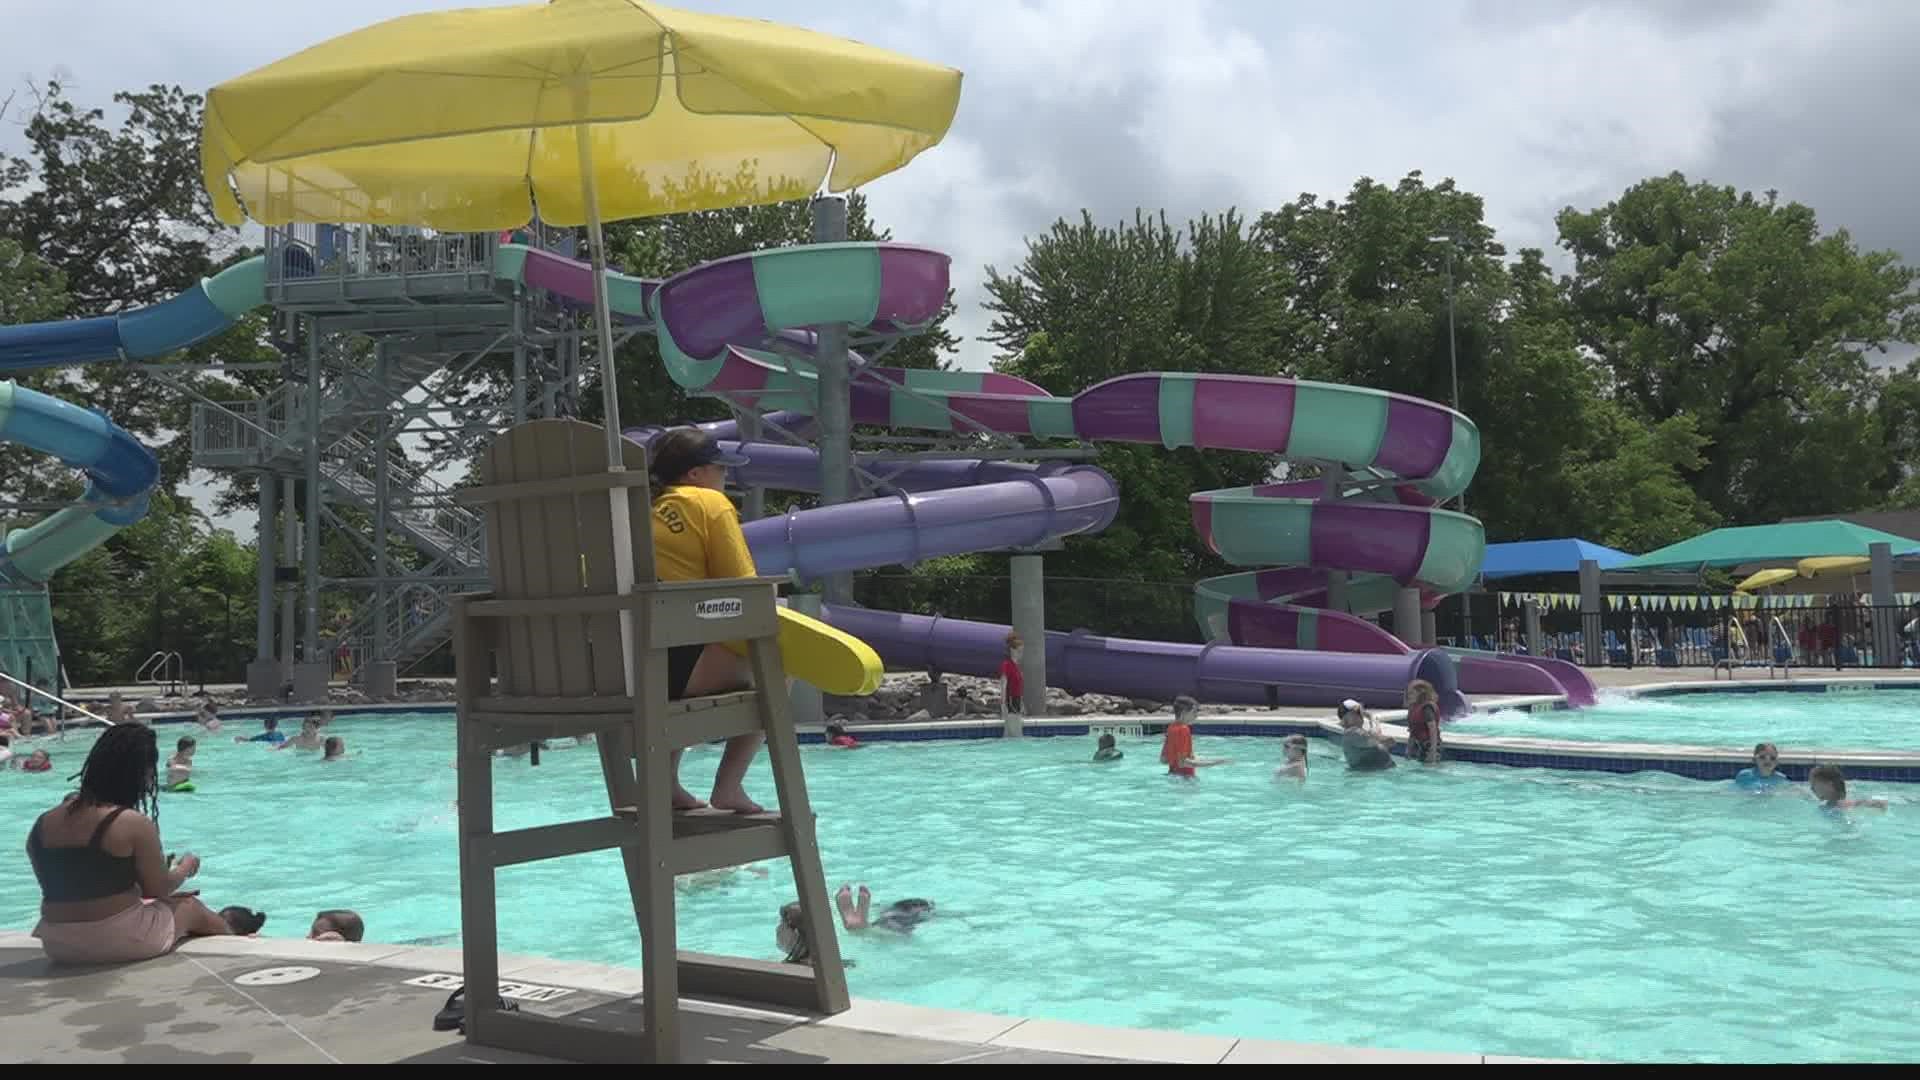 Blanchette and Wapelhorst aquatic facilities are requring residency in certain zip codes.